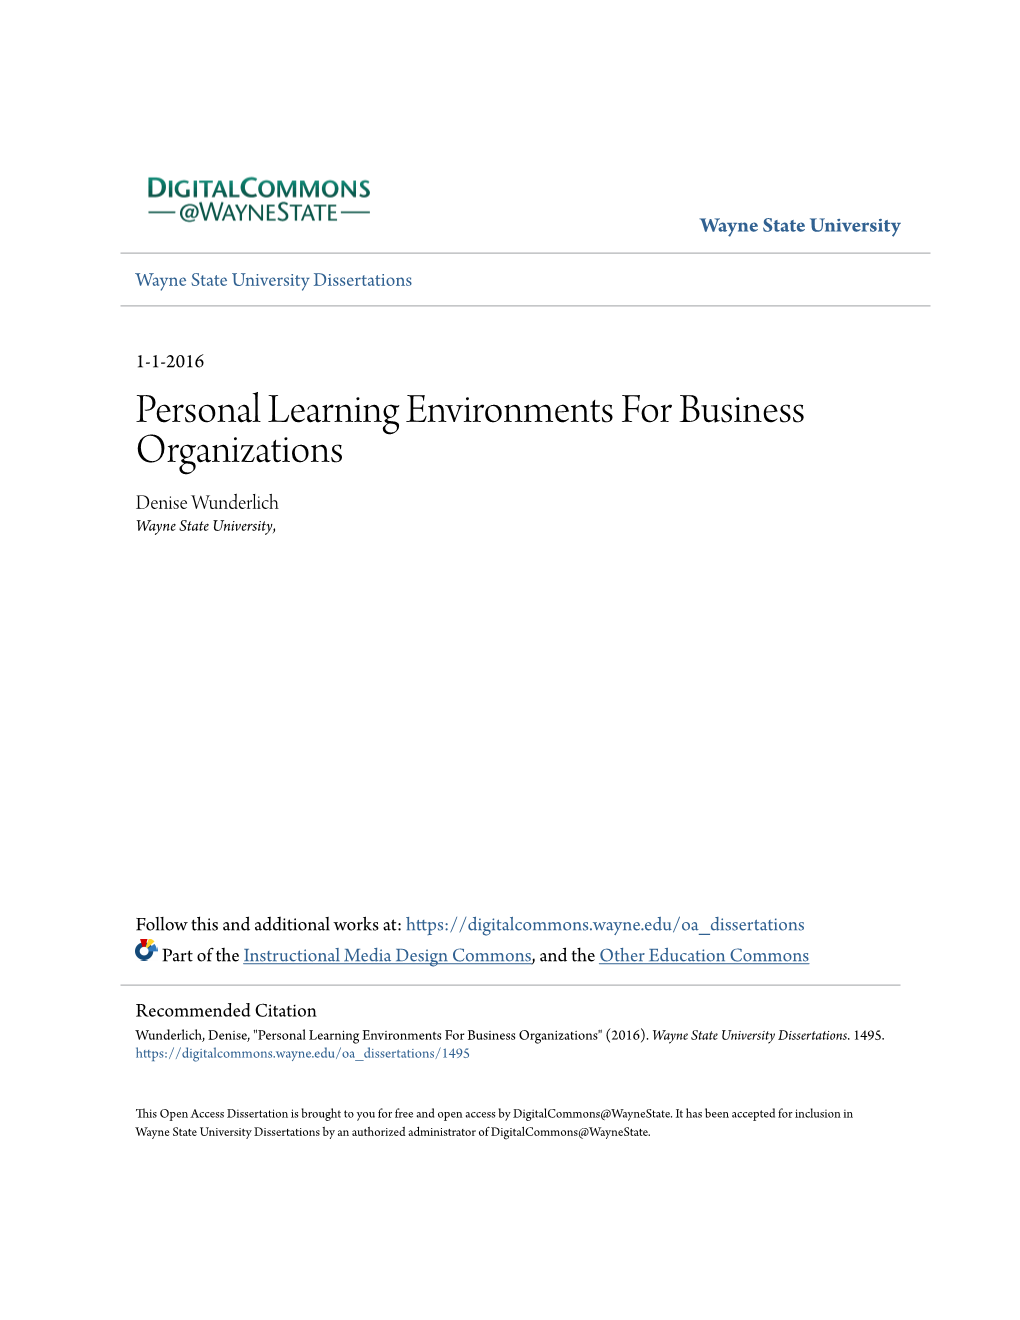 Personal Learning Environments for Business Organizations Denise Wunderlich Wayne State University